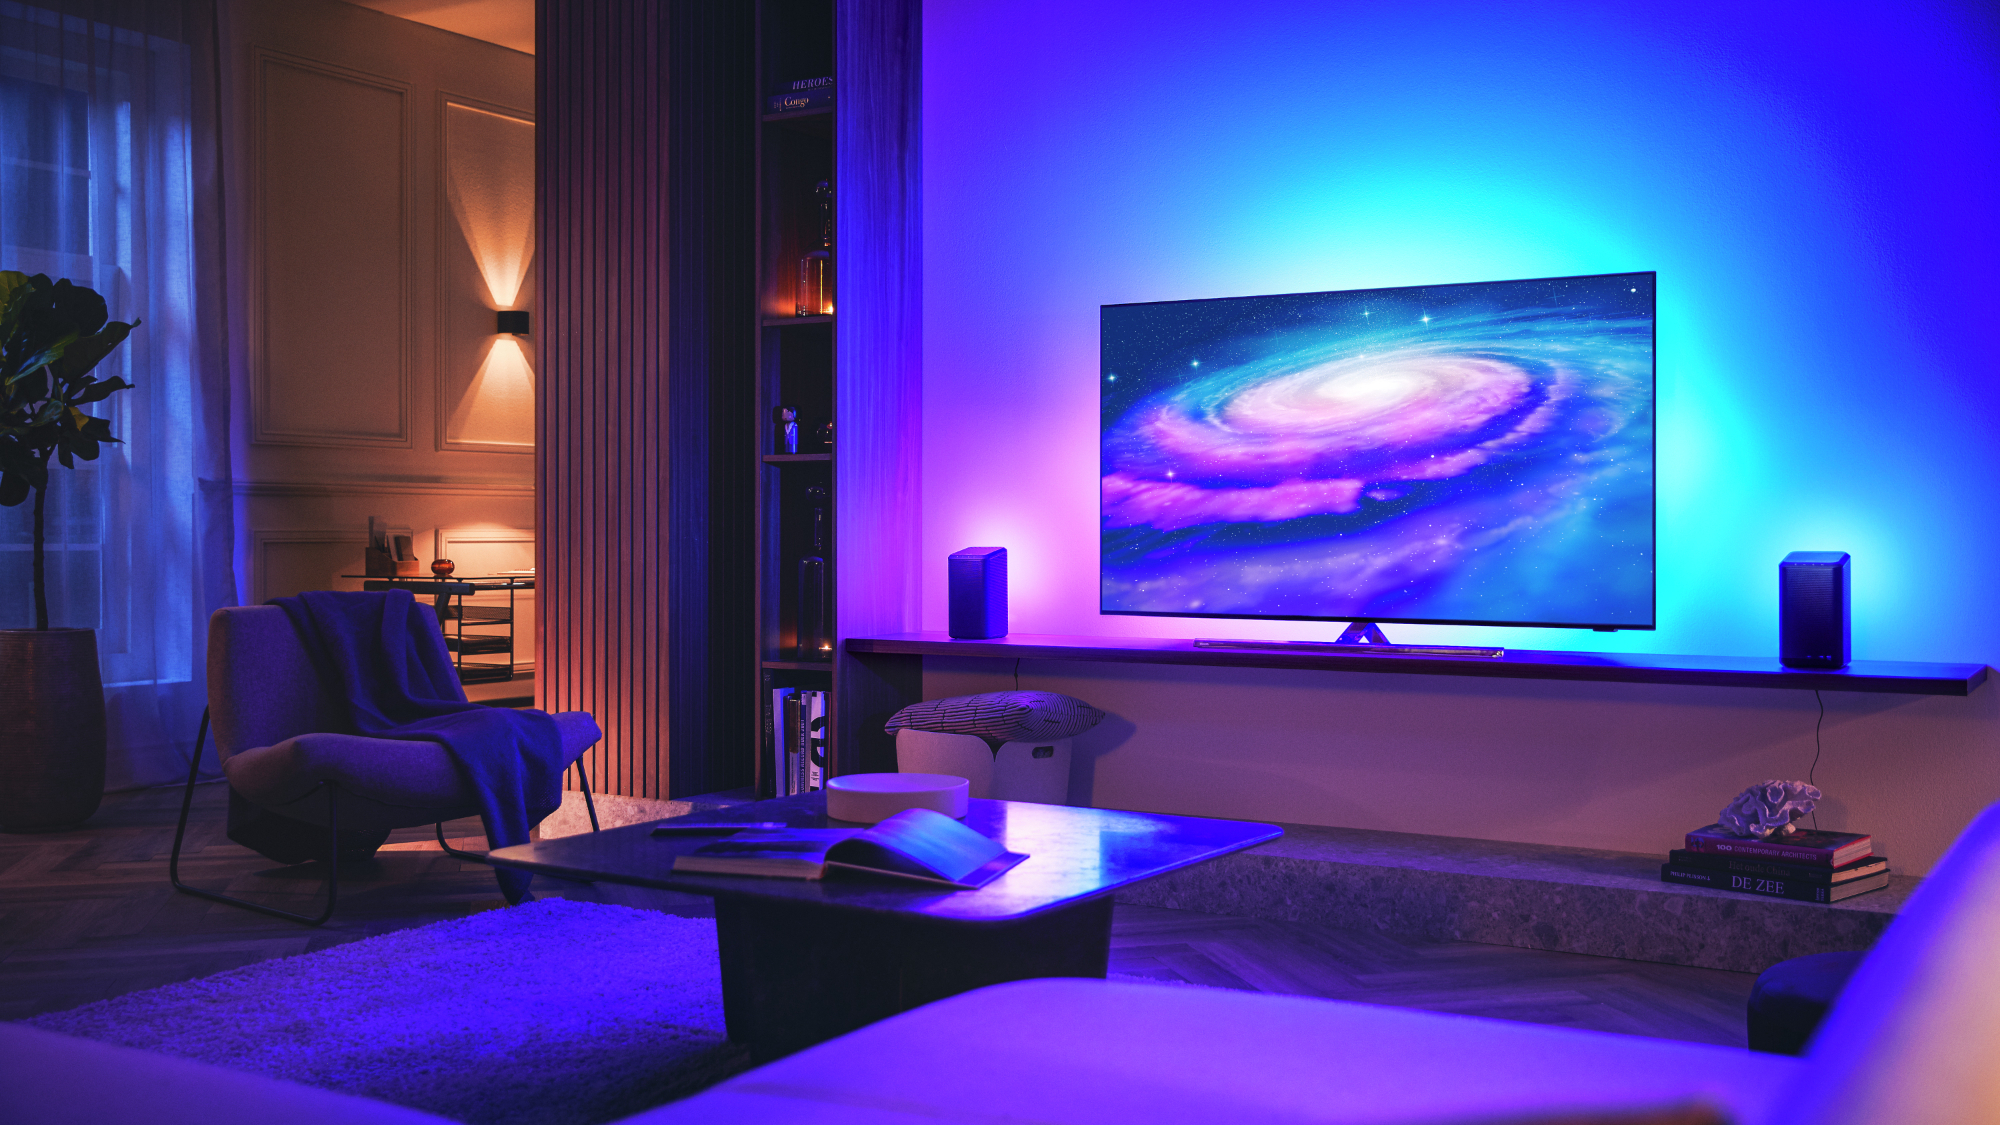 Look Blog: Professional Philips TVs: A Complete Review of the Best